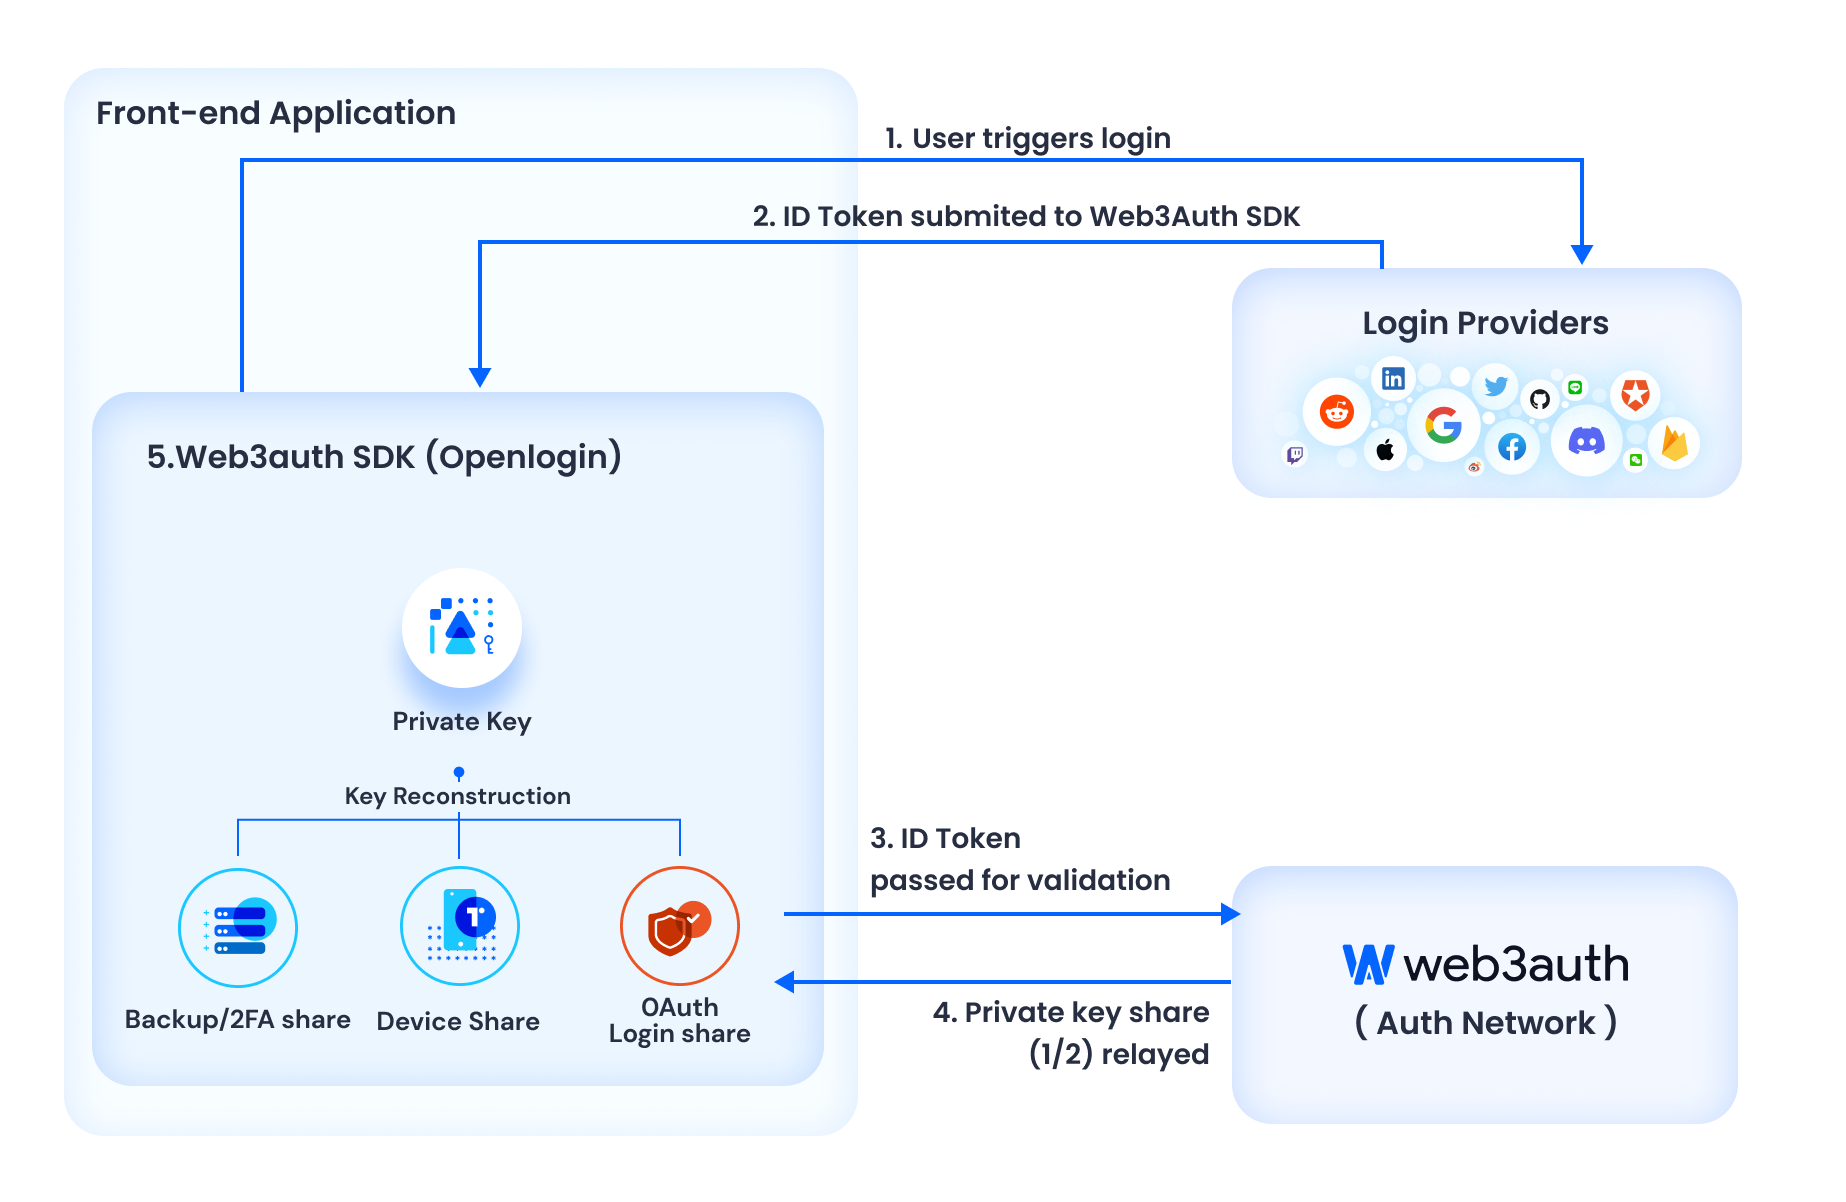 This diagram describes the relationship between the Web3Auth SDK and integrating wallet